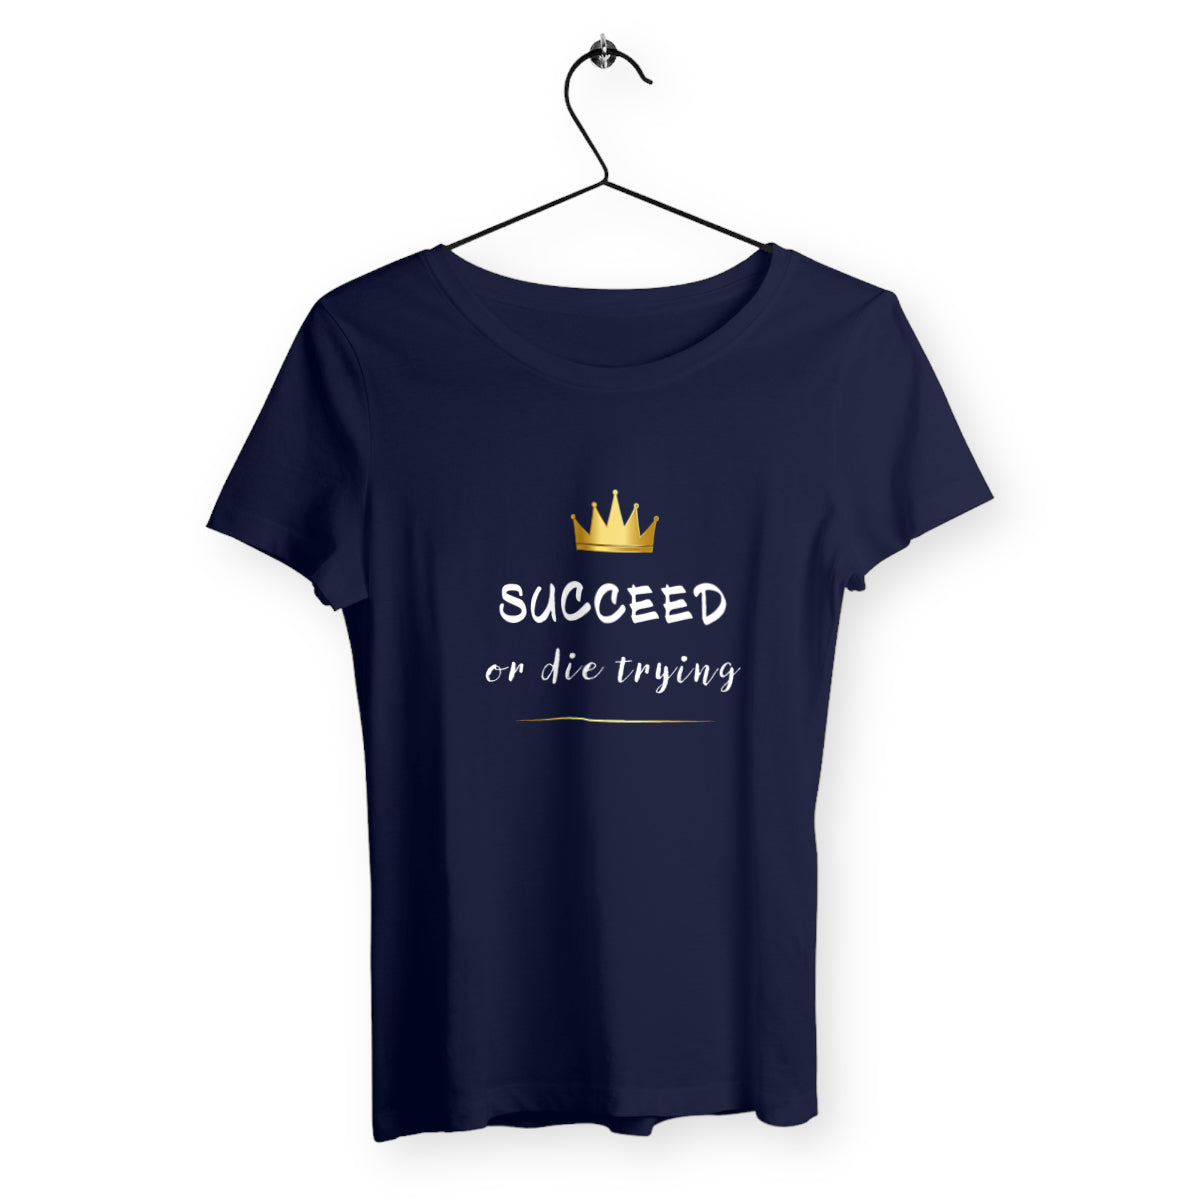 T-shirt femme succeed or die trying